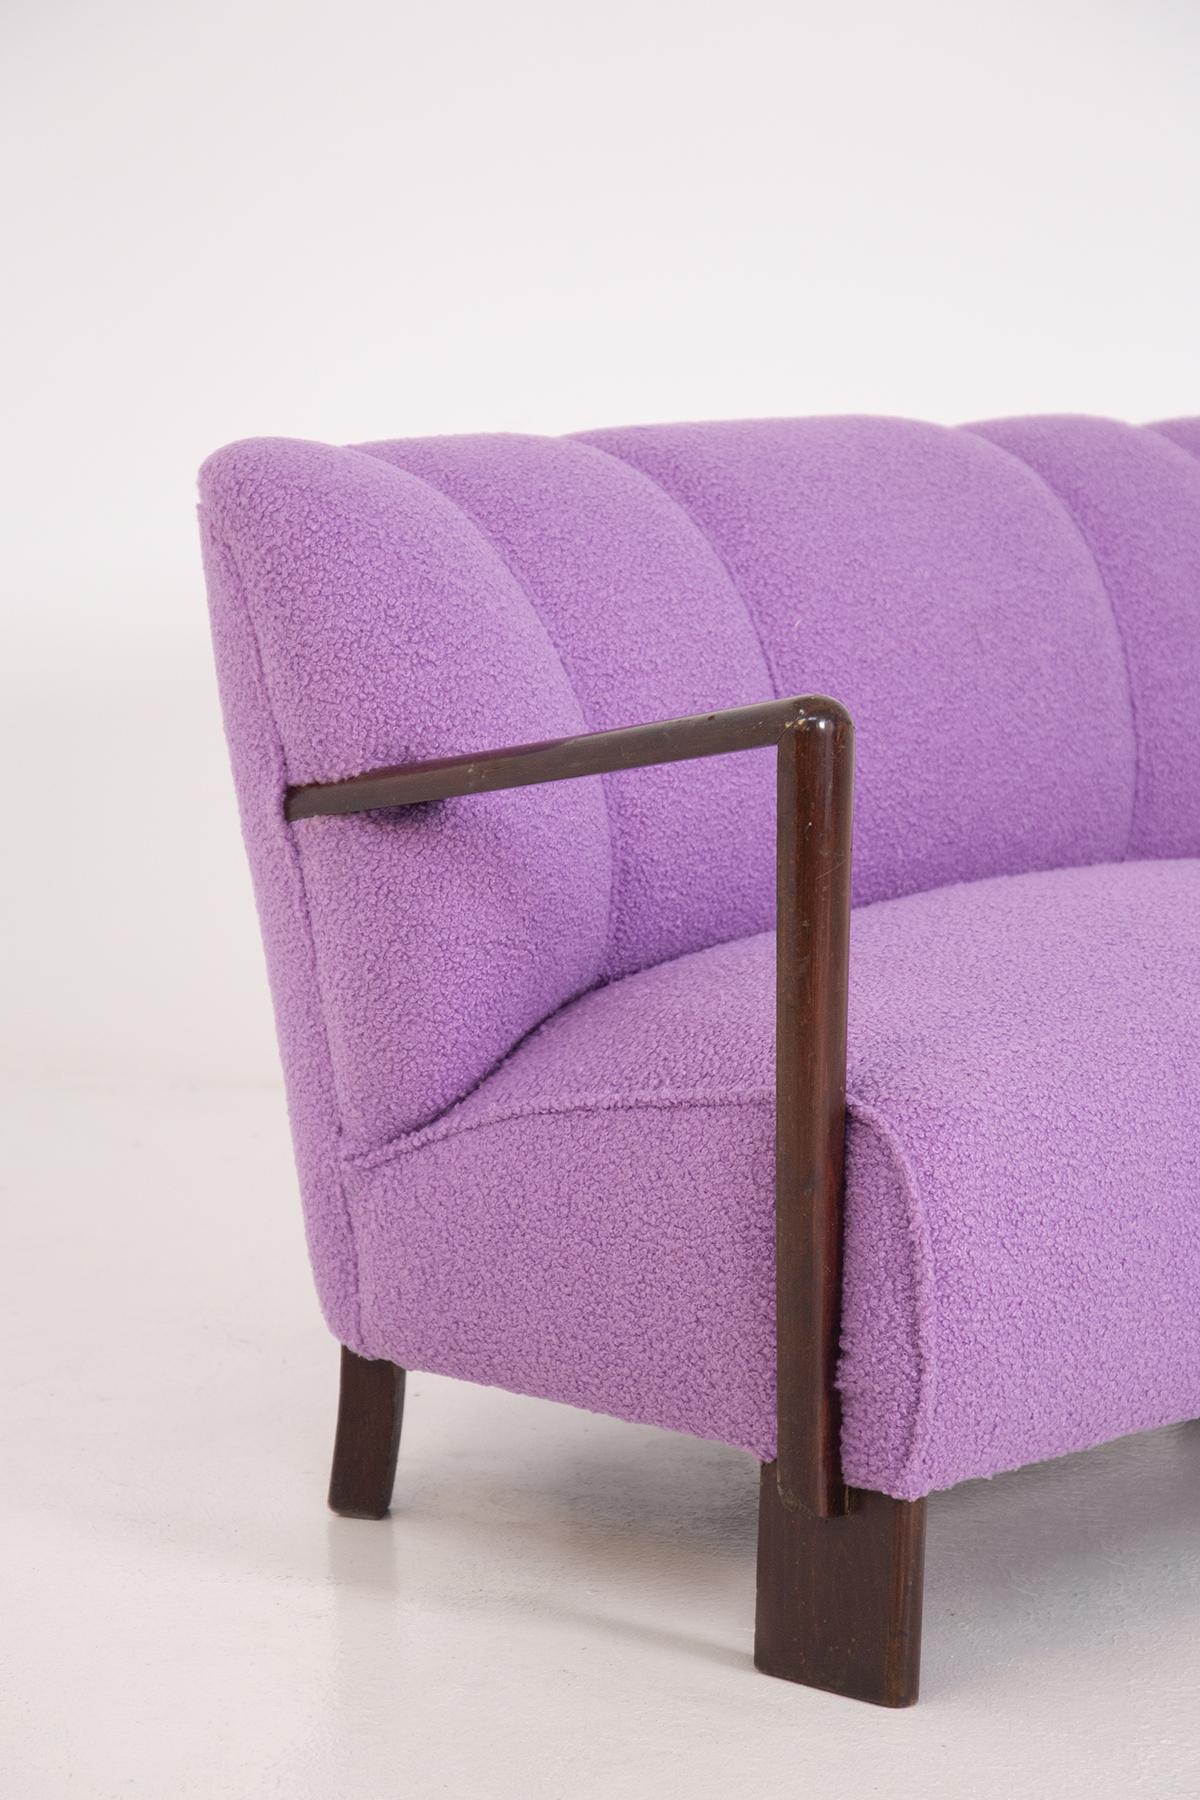 Comfortable two-seater Italian sofa from the 1950s. The sofa has been recently restored. The fabric has also been reupholstered in a warm and soft purple bouclé fabric. Italian Manifacture.
The sofa given its small size can be classified as a